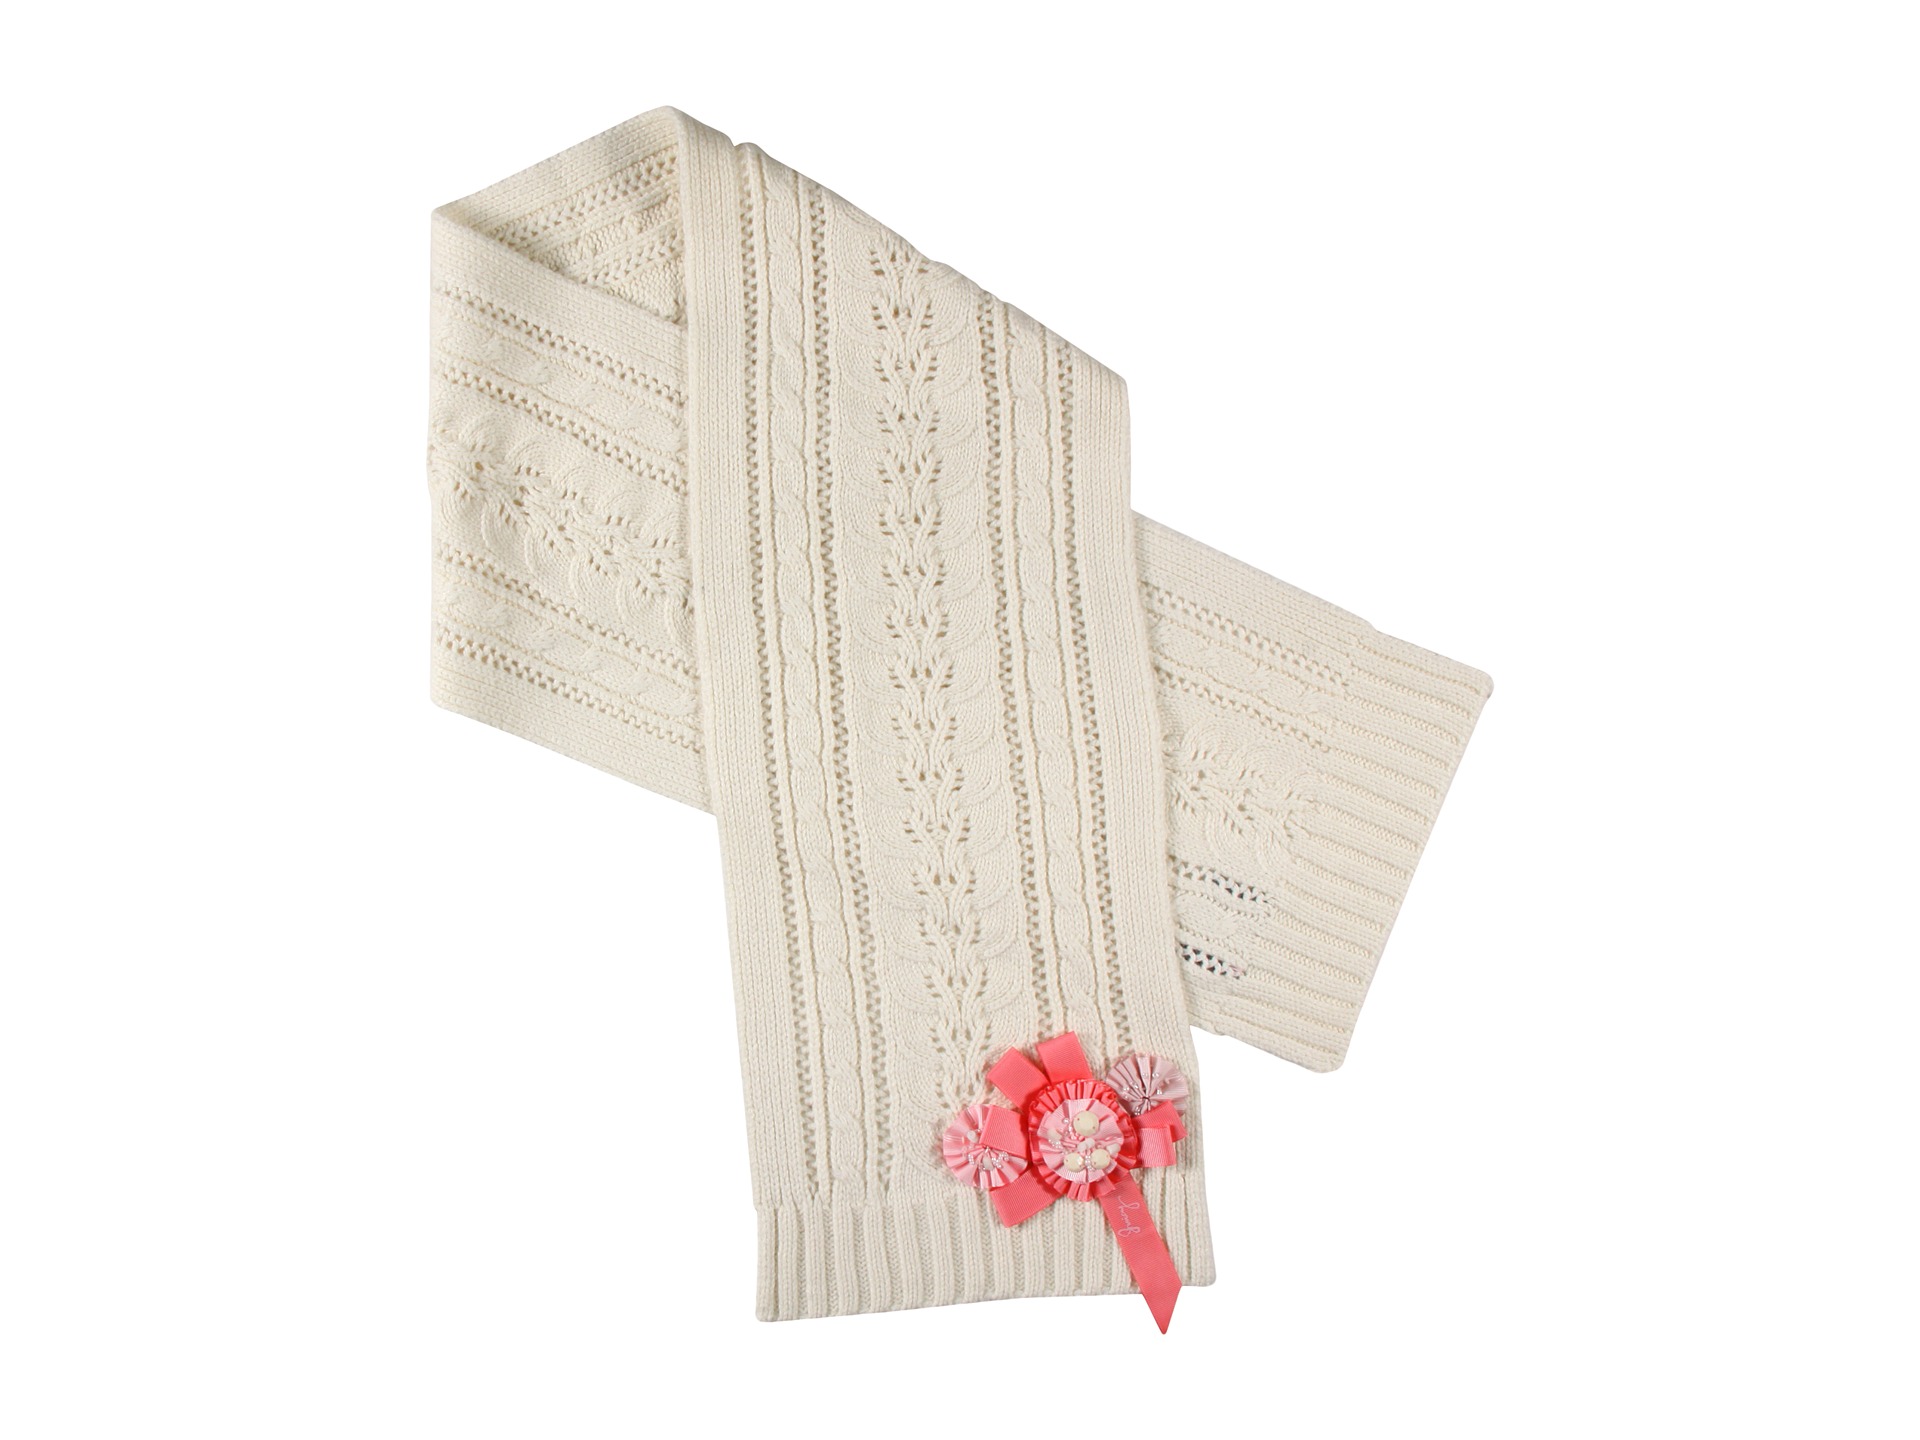 Juicy Couture Kids Embellished Scarf $21.99 (  MSRP $68.00)